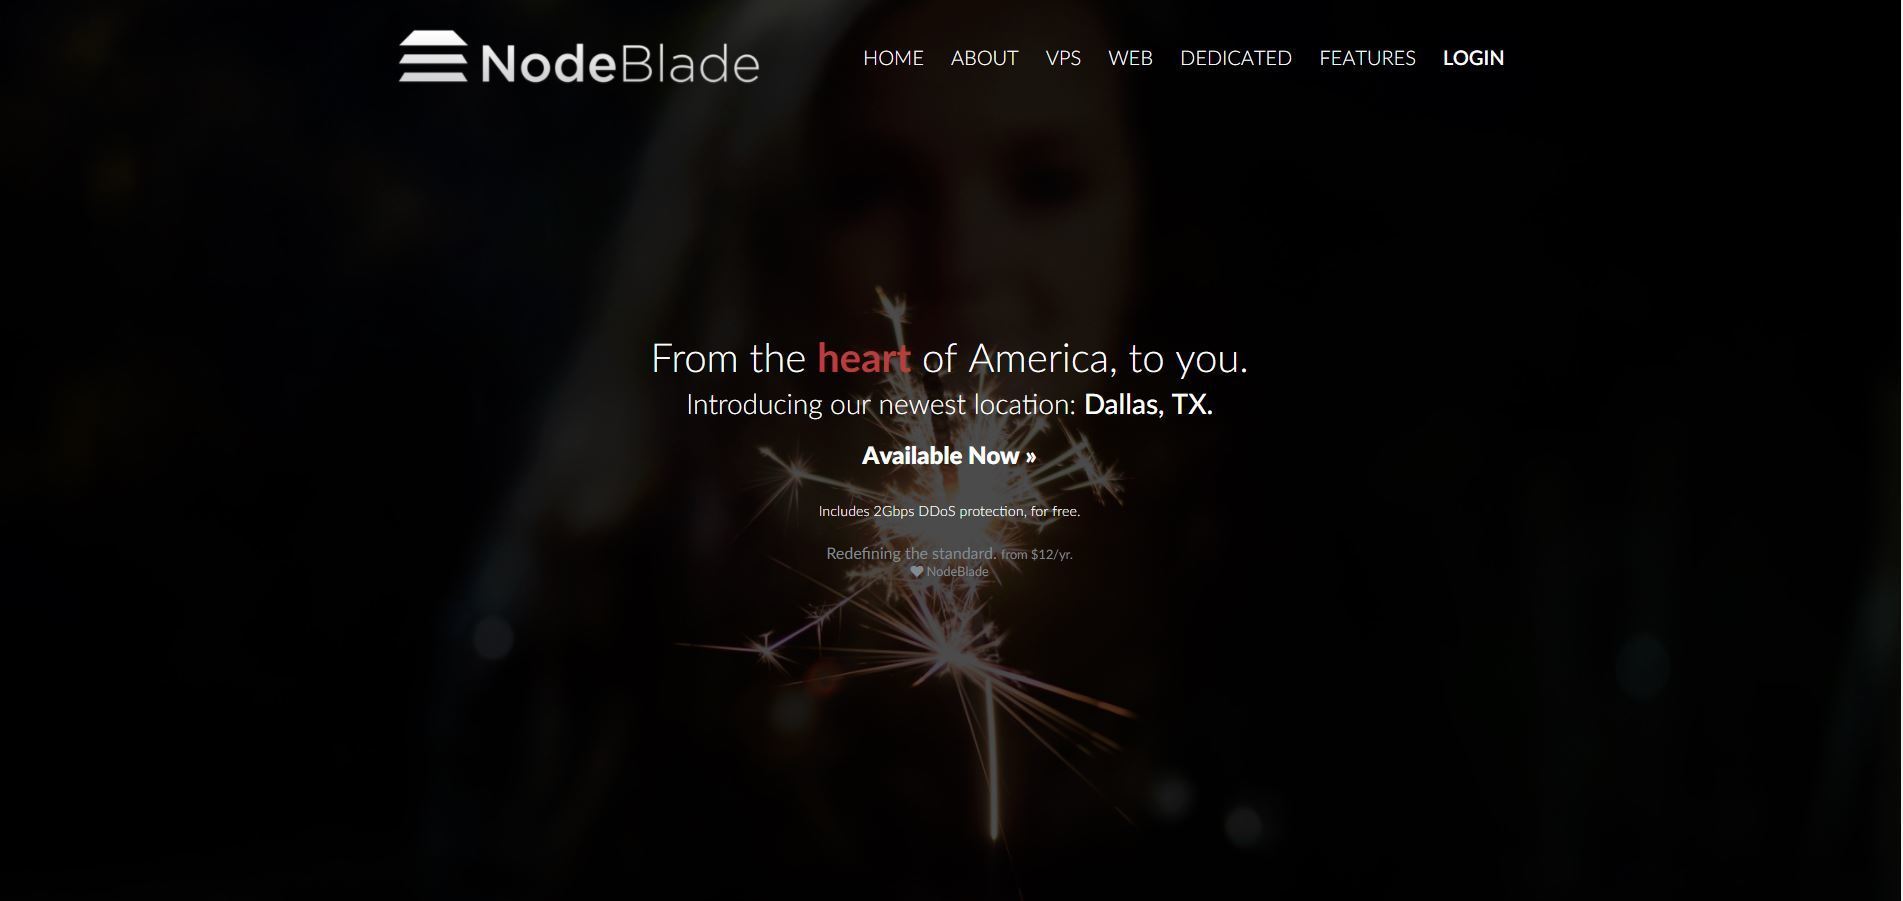 NodeBlade Exclusive Offer: Atlanta 1gb VPS from $3/month!